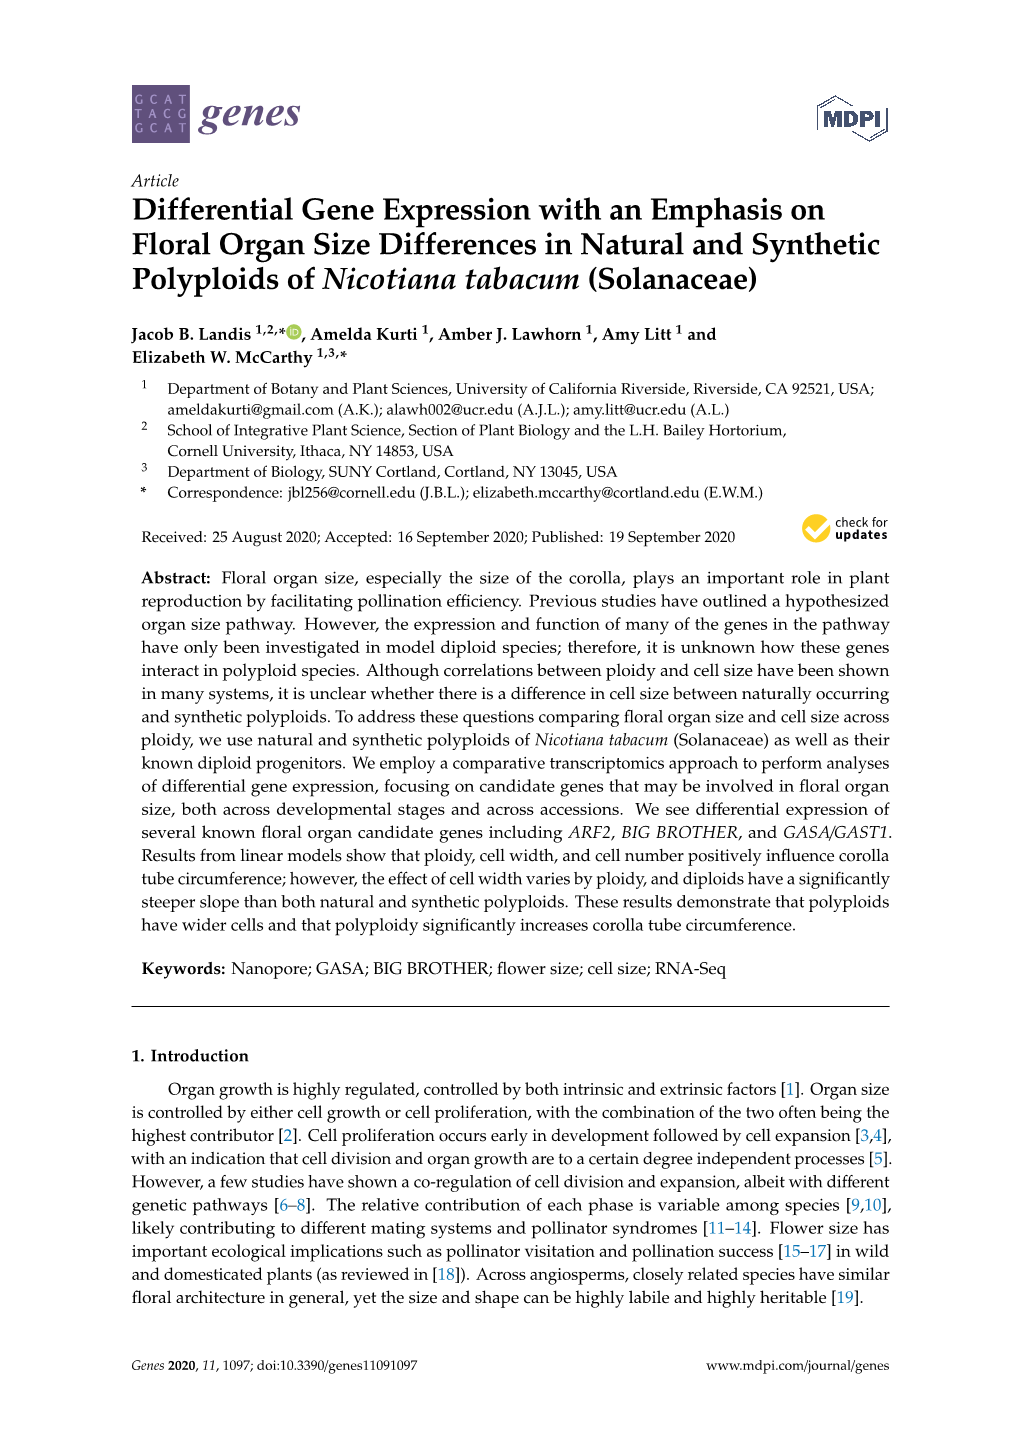 Differential Gene Expression with an Emphasis on Floral Organ Size Differences in Natural and Synthetic Polyploids of Nicotiana Tabacum (Solanaceae)